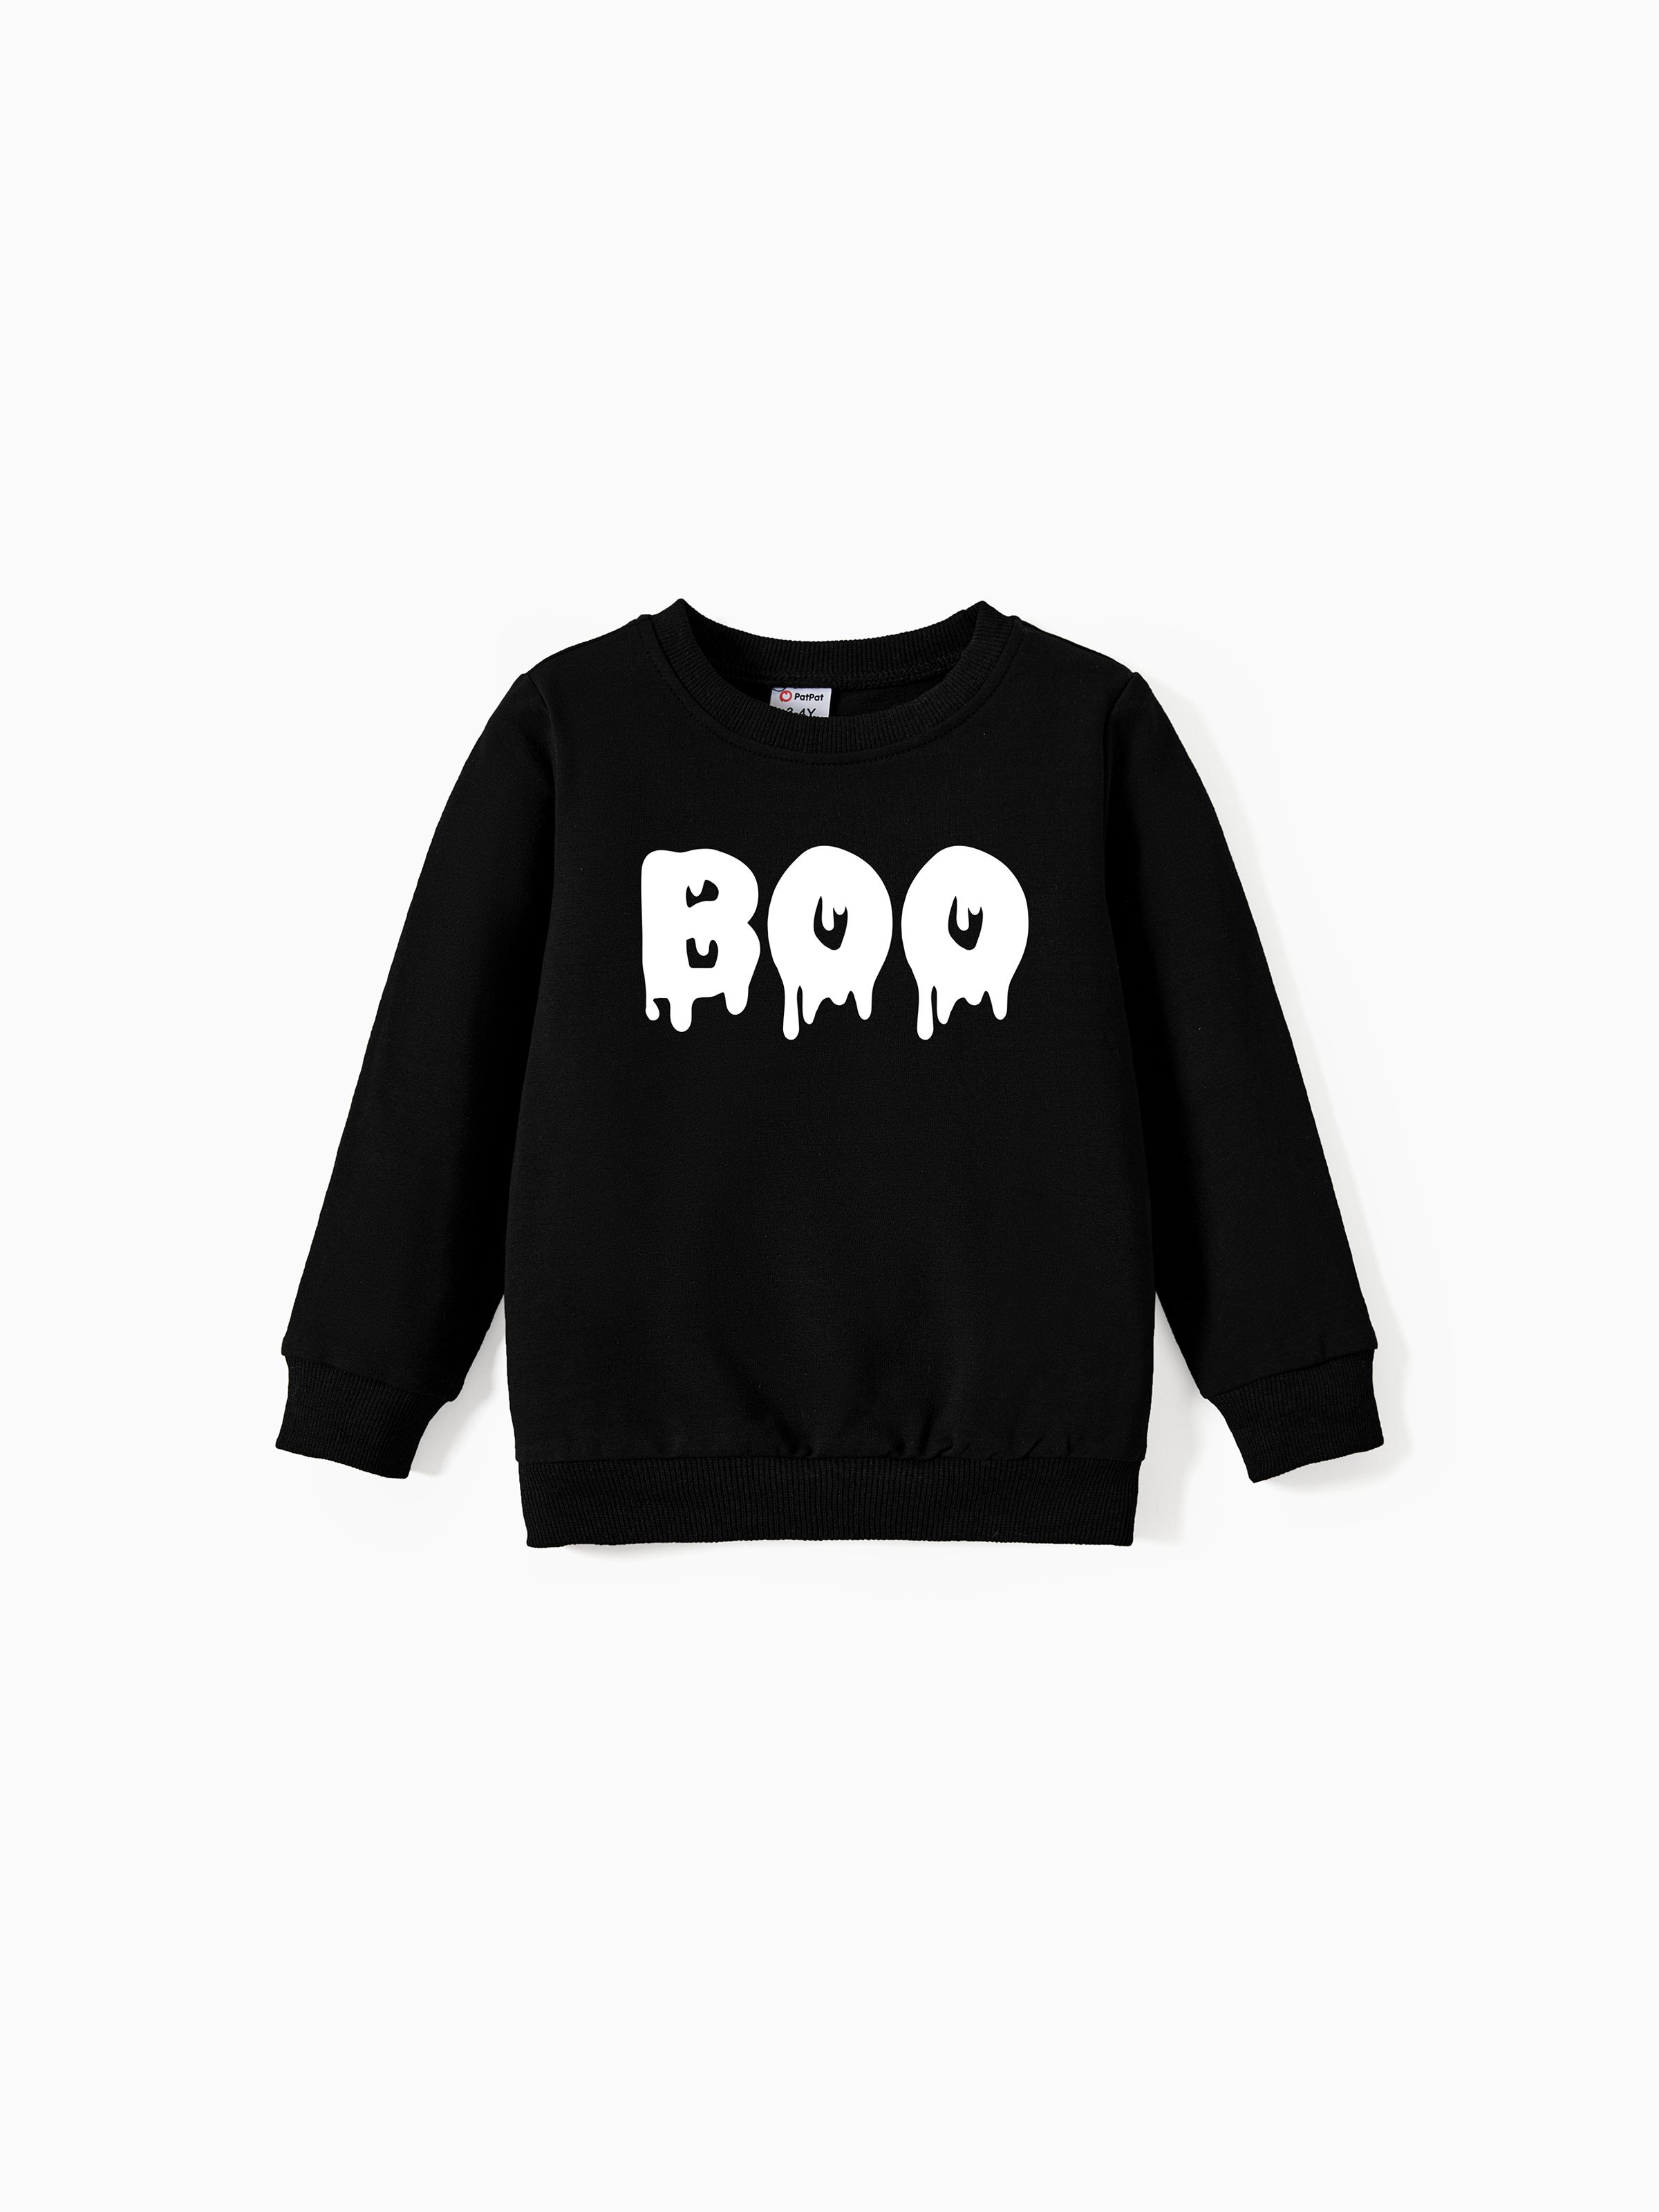 

Halloween Family Matching Fun and Quirky Slogan Cotton Long Sleeves Black Tops